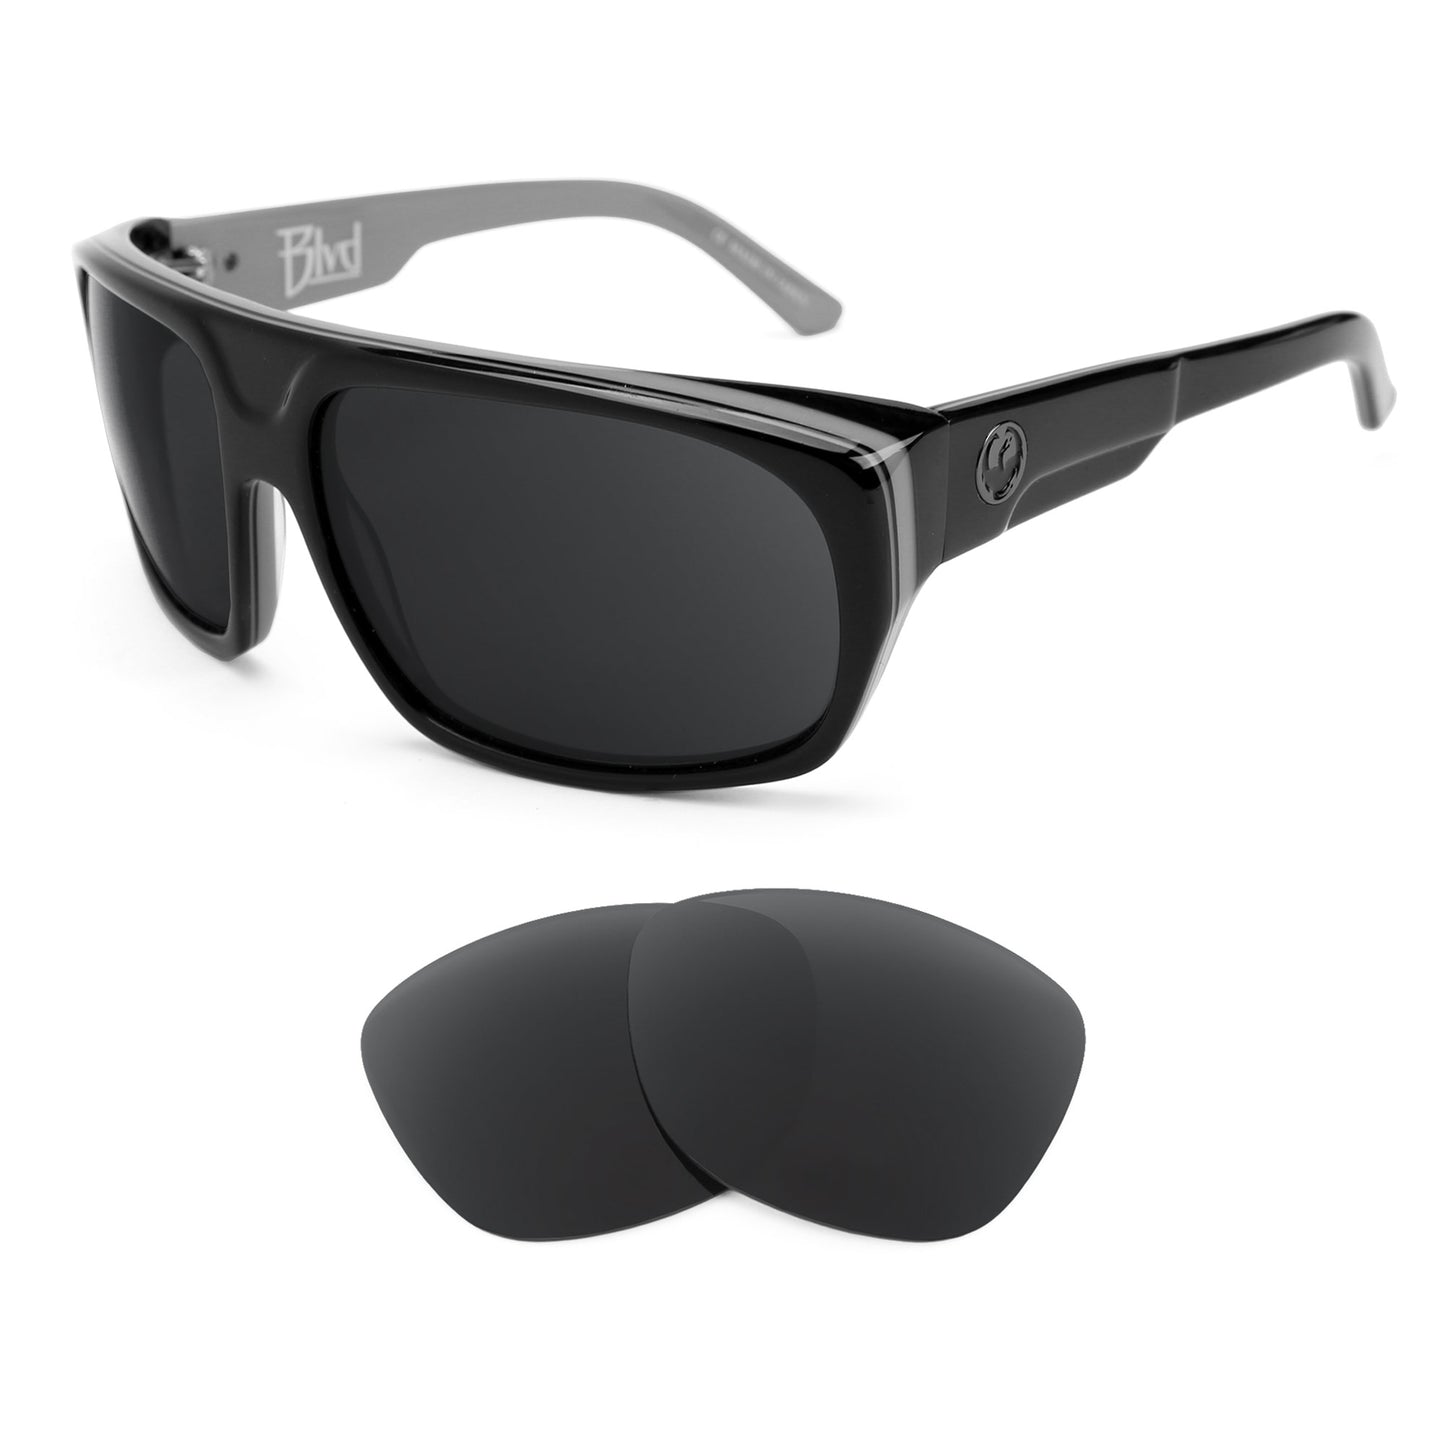 Dragon BLVD sunglasses with replacement lenses